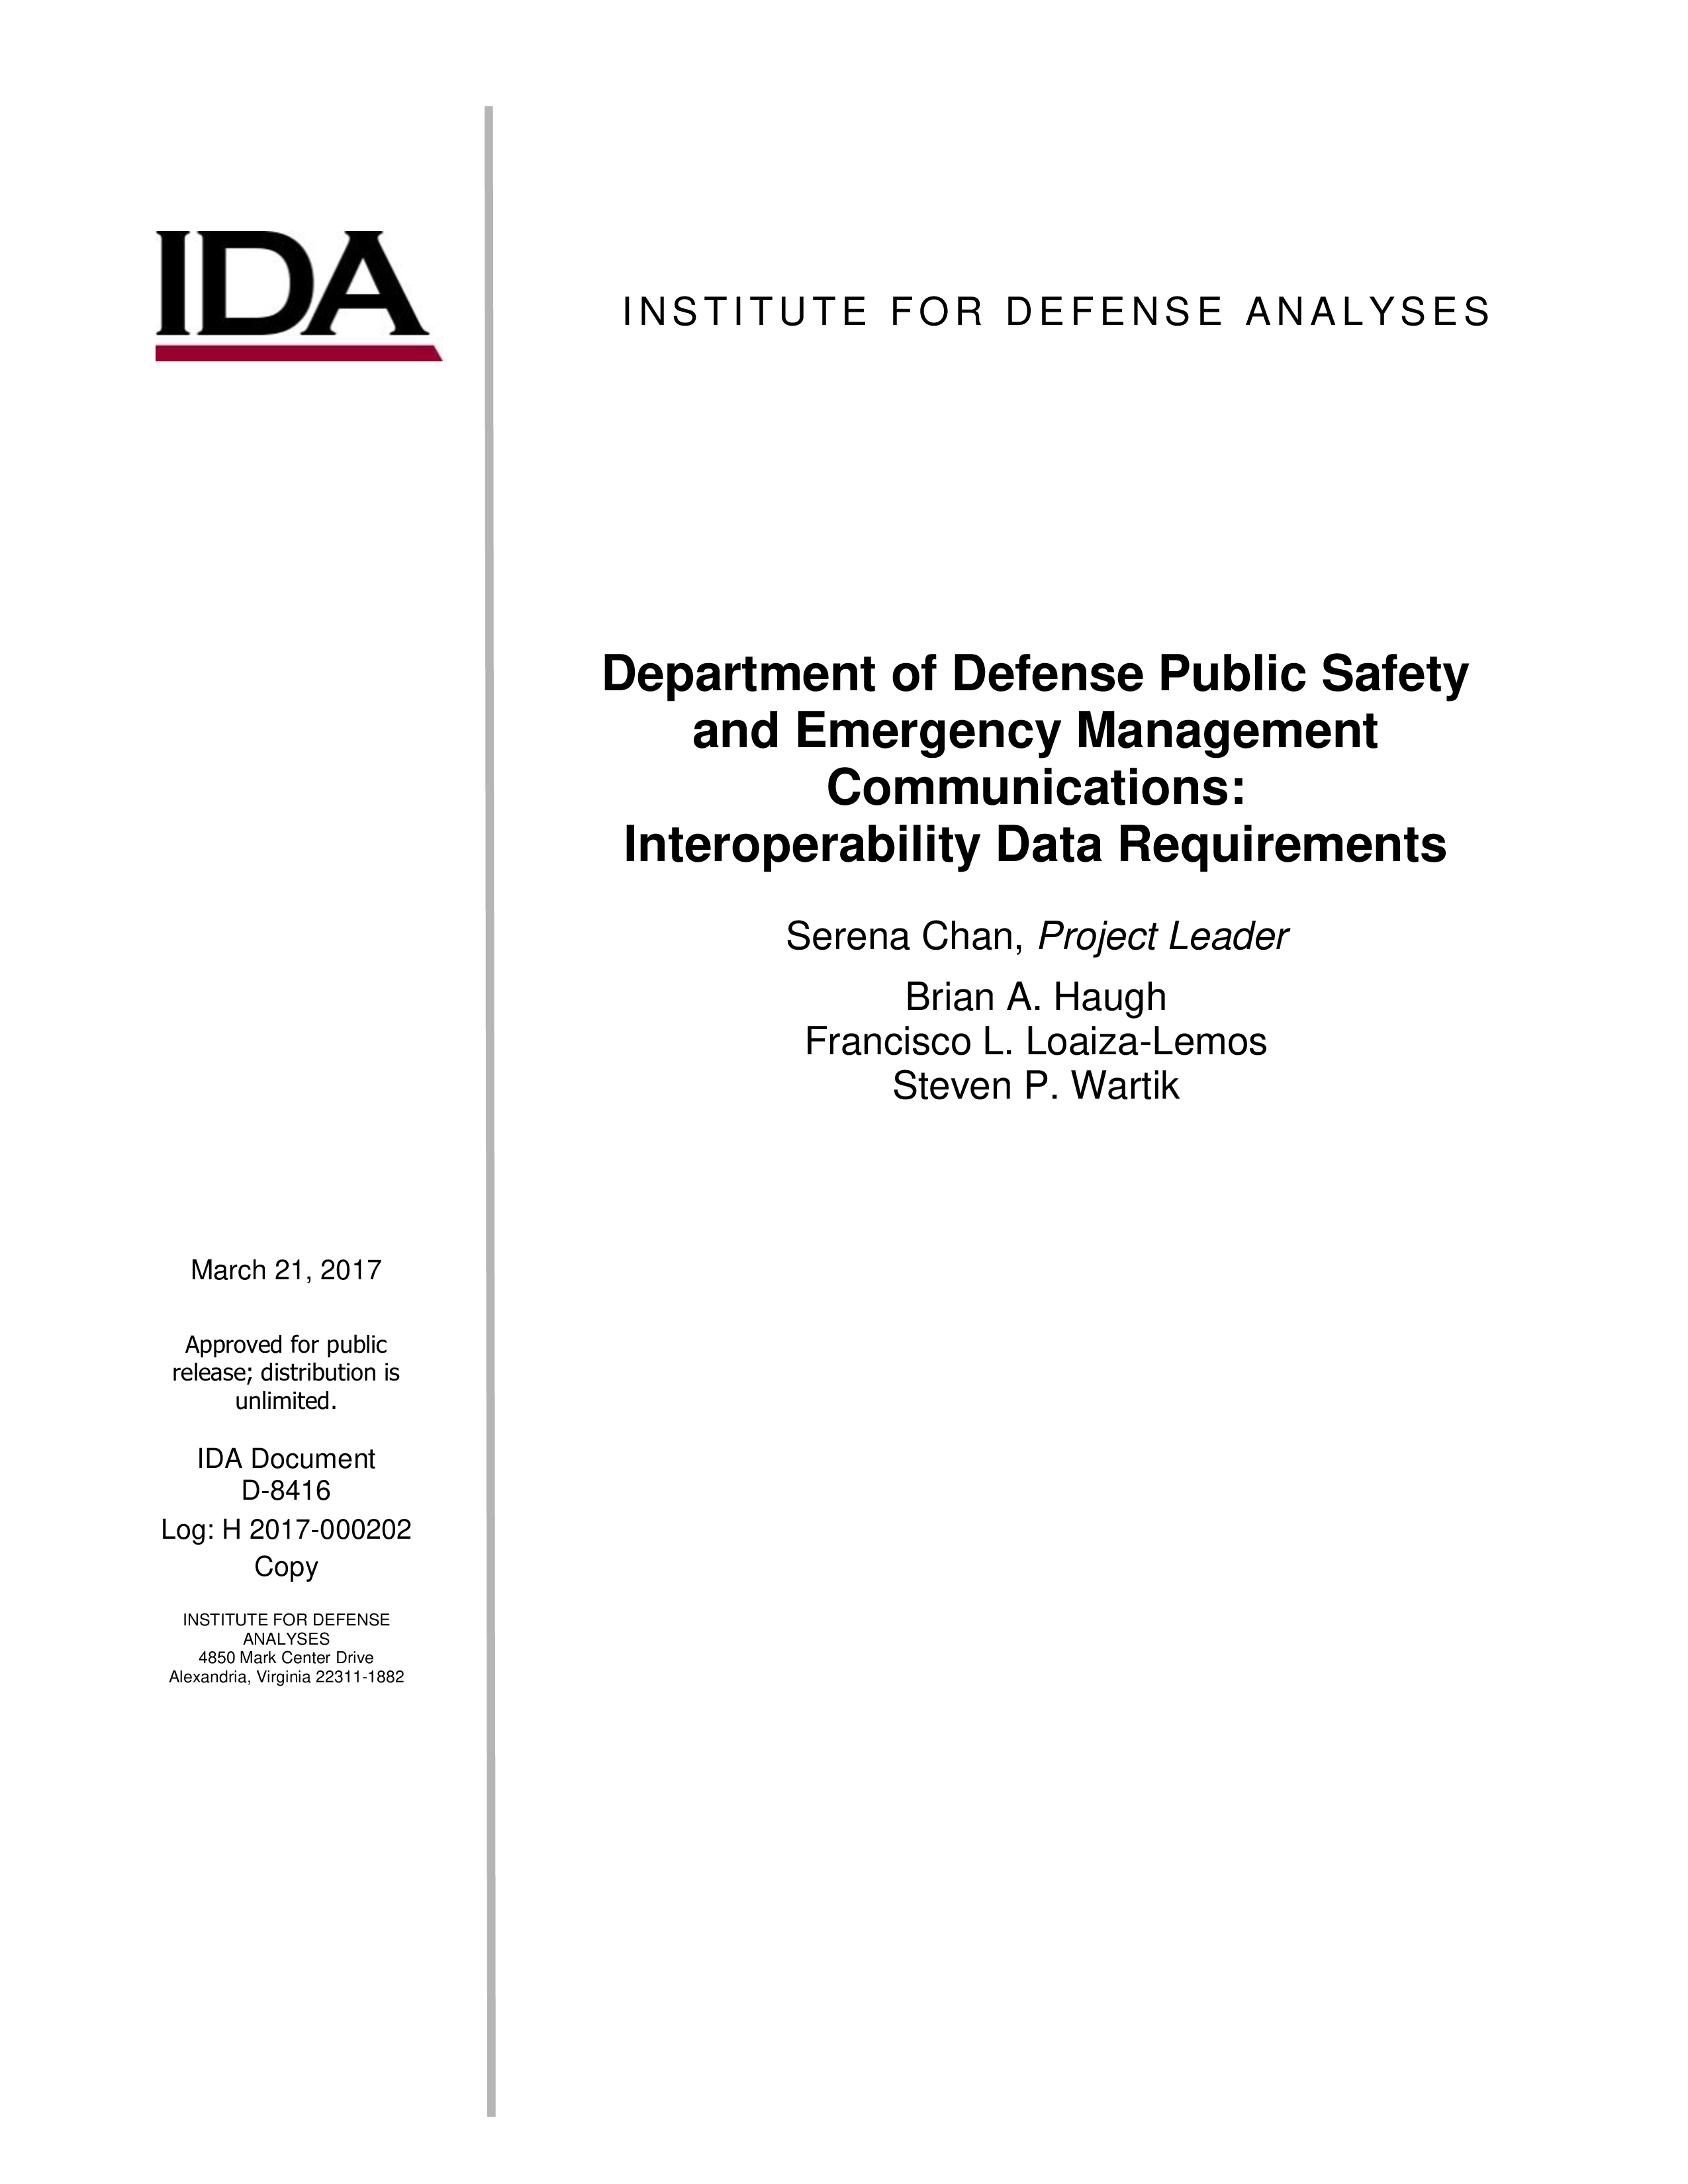 Department of Defense Public Safety and Emergency Management Communications: Interoperability Data Requirements